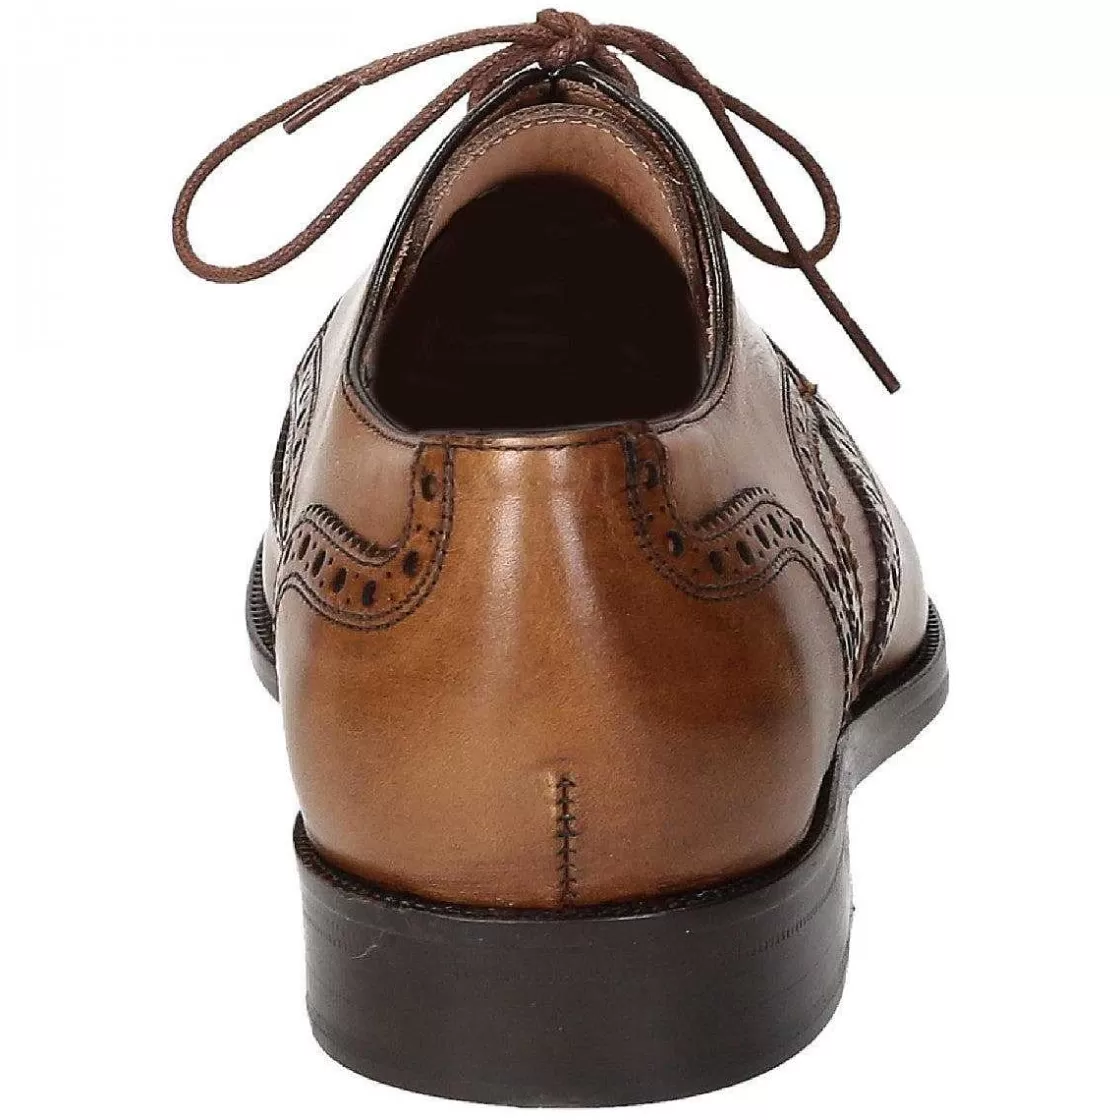 Leonardo Leather-Colored Men'S Lace-Up Shoes With Perforated Dovetail Toe Outlet